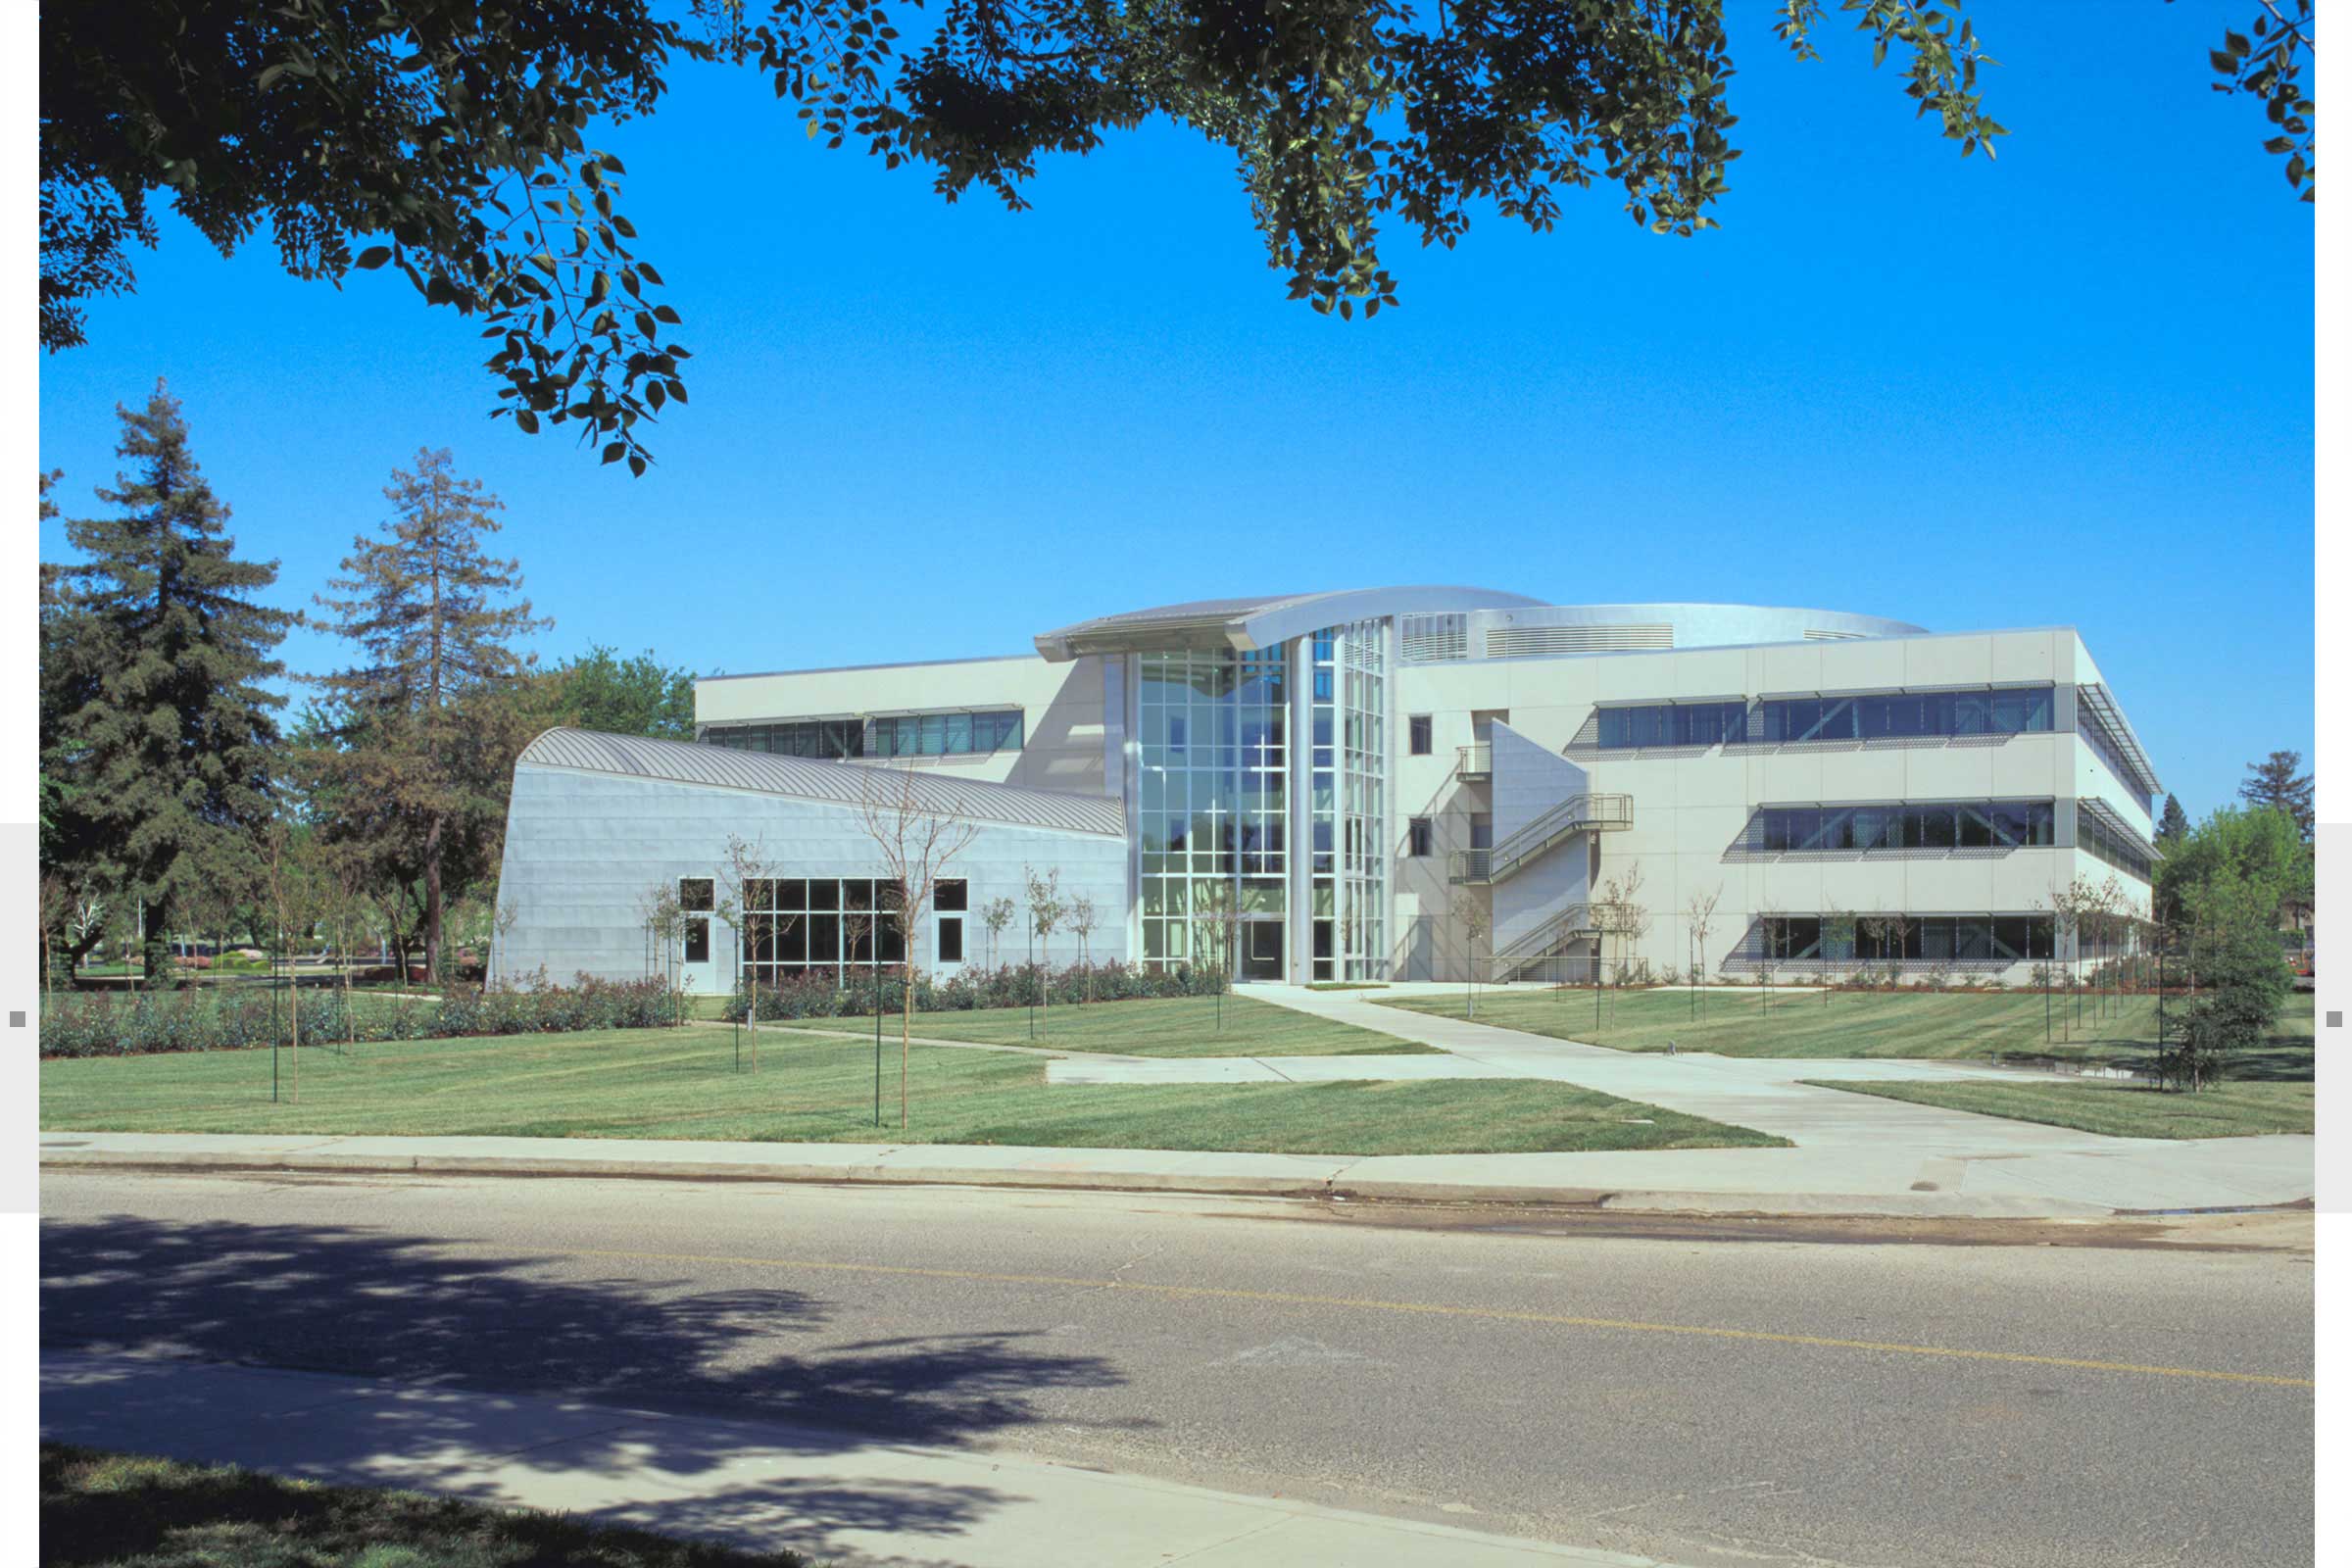 CSU exterior view with lawns and trees